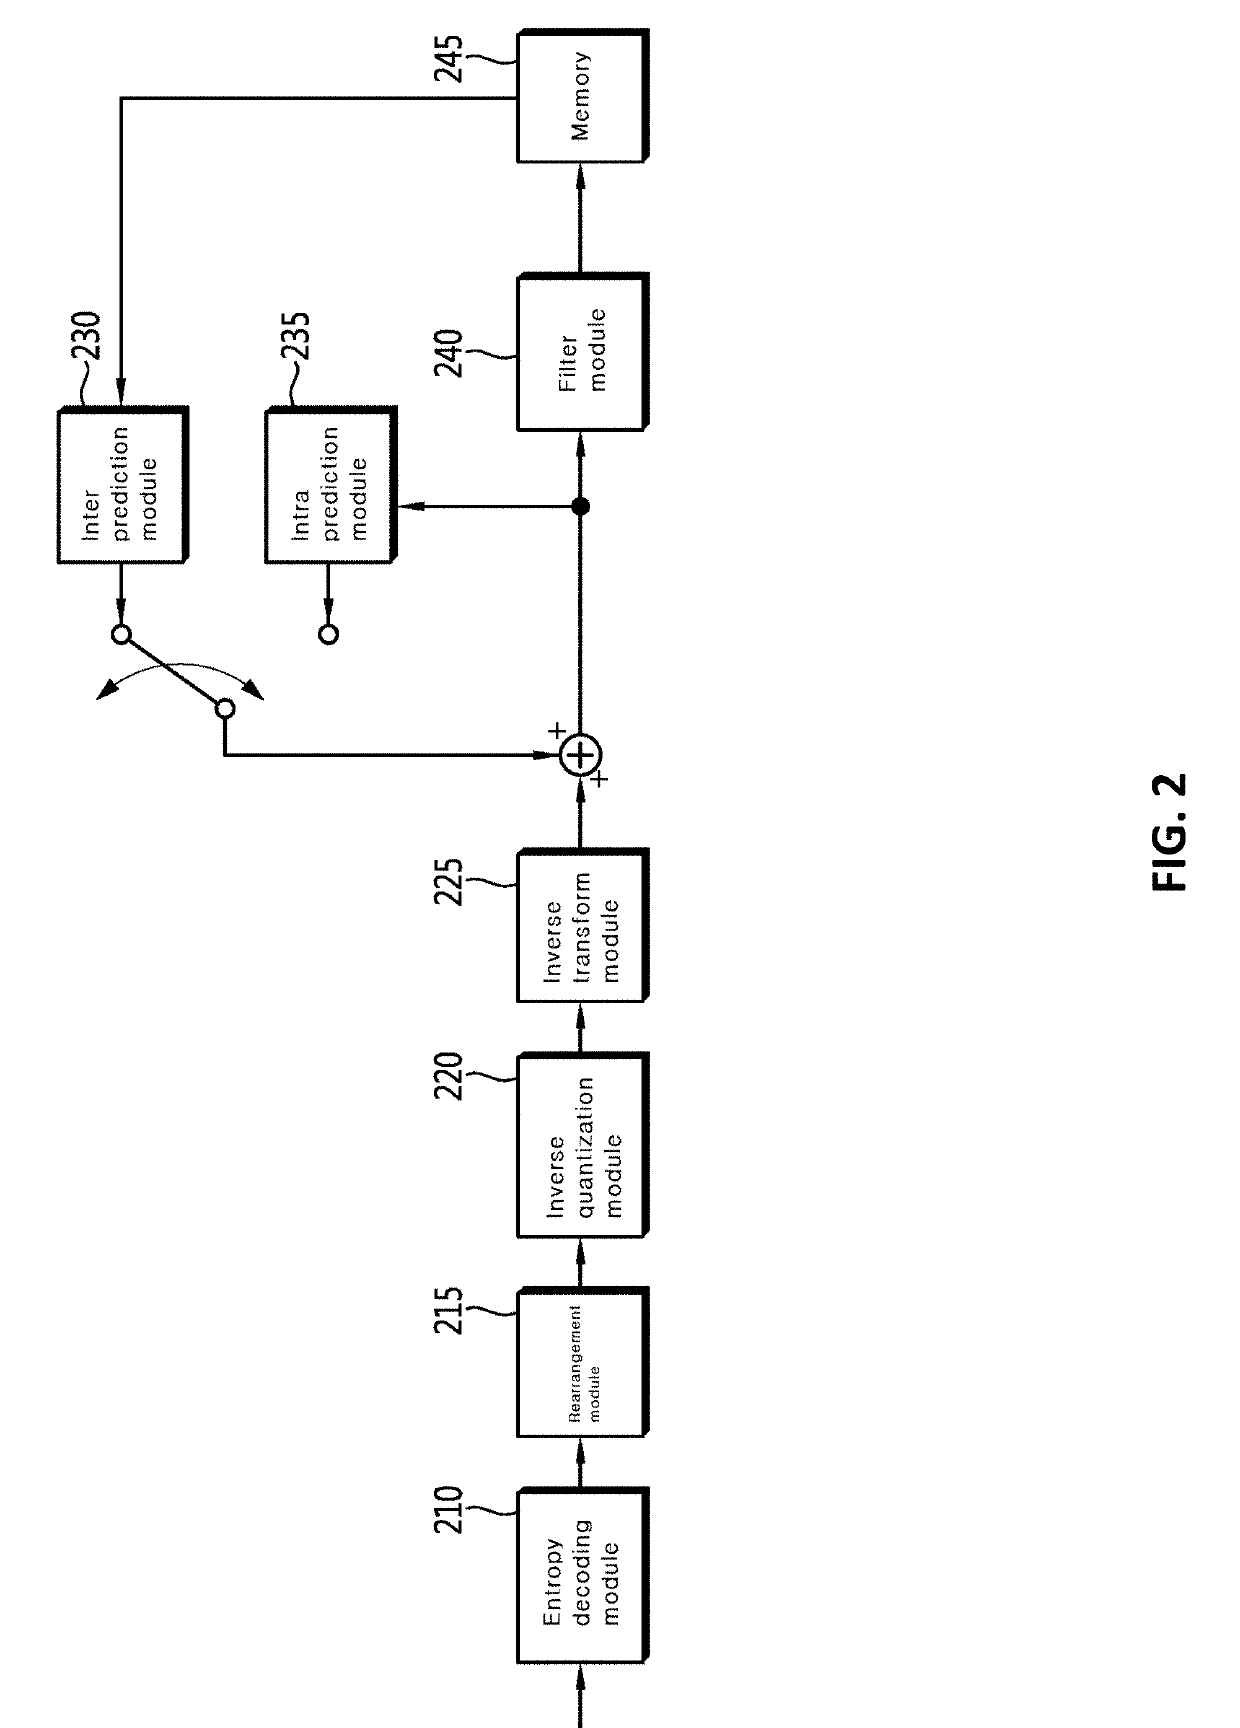 Intra prediction-based video signal processing method and apparatus